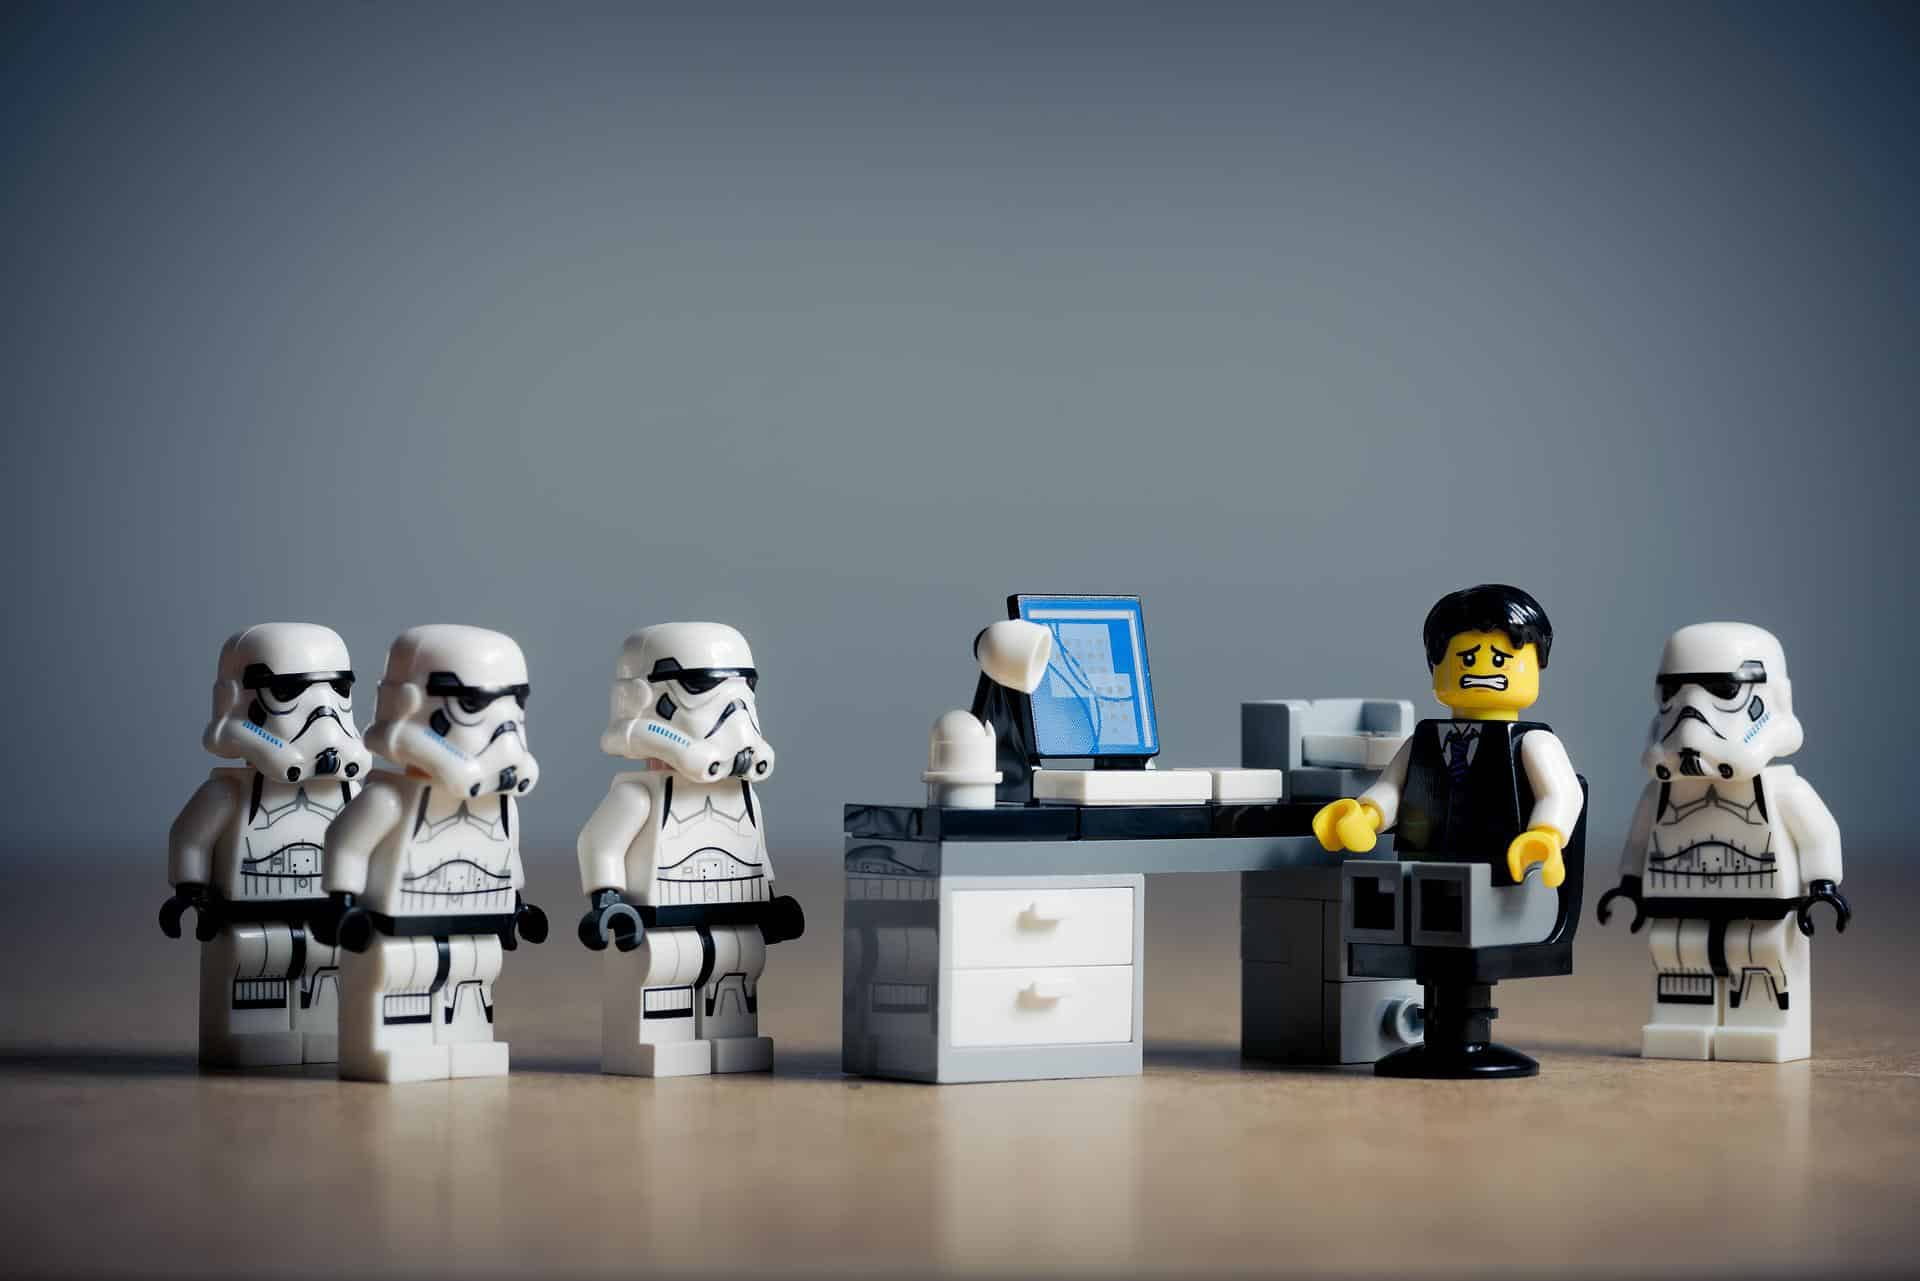 Photo of lego characters in office by www_slon_pics for Pixabay